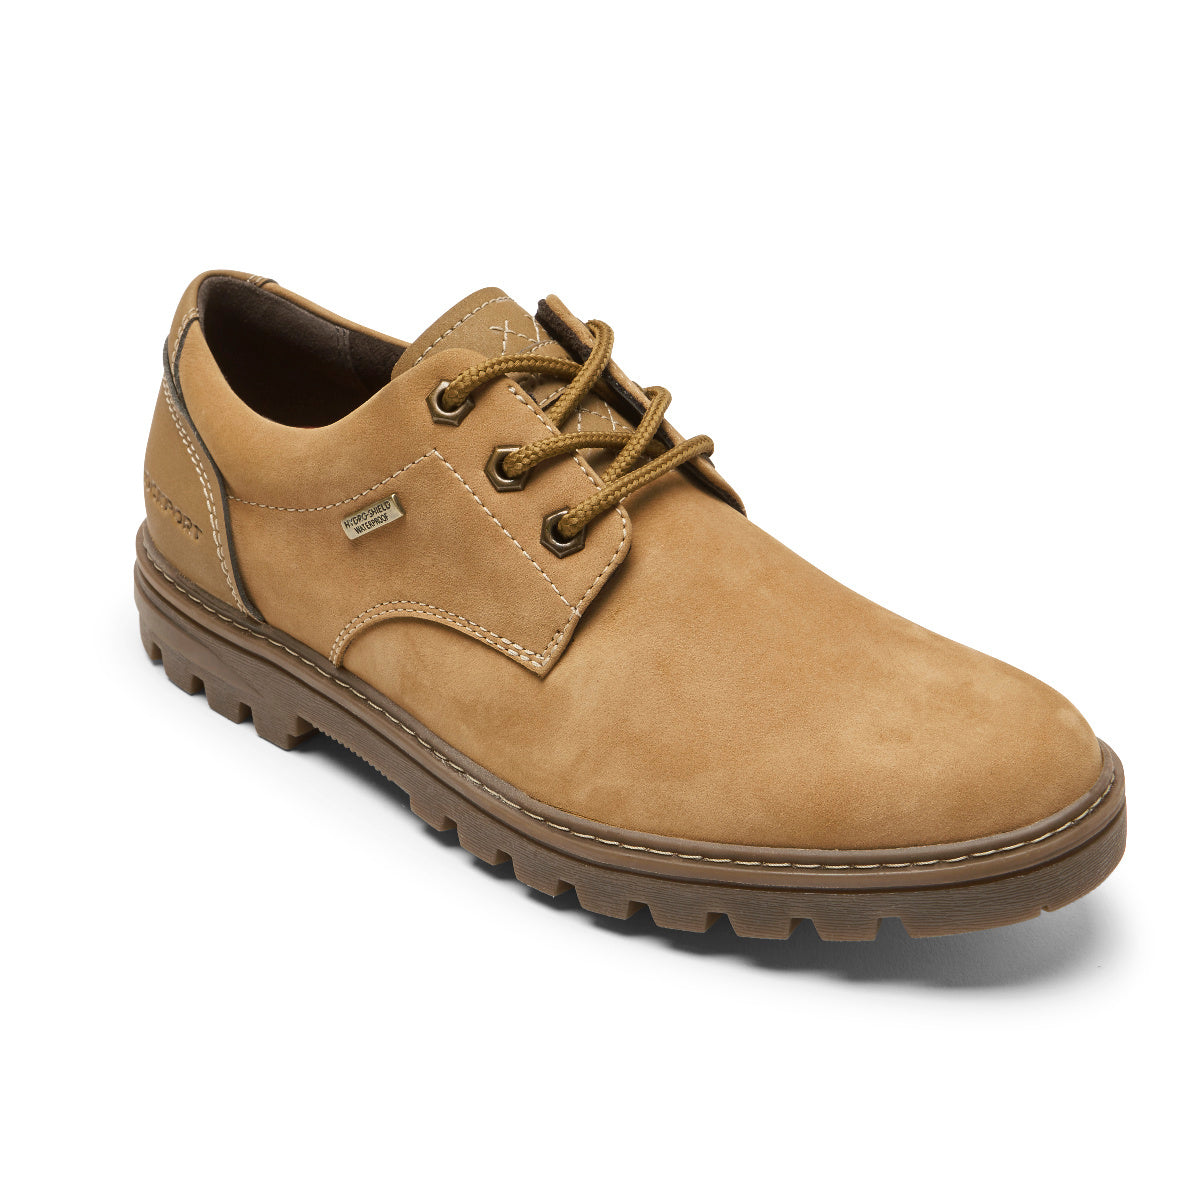 Rockport Mens Weather or Not Waterproof Oxford